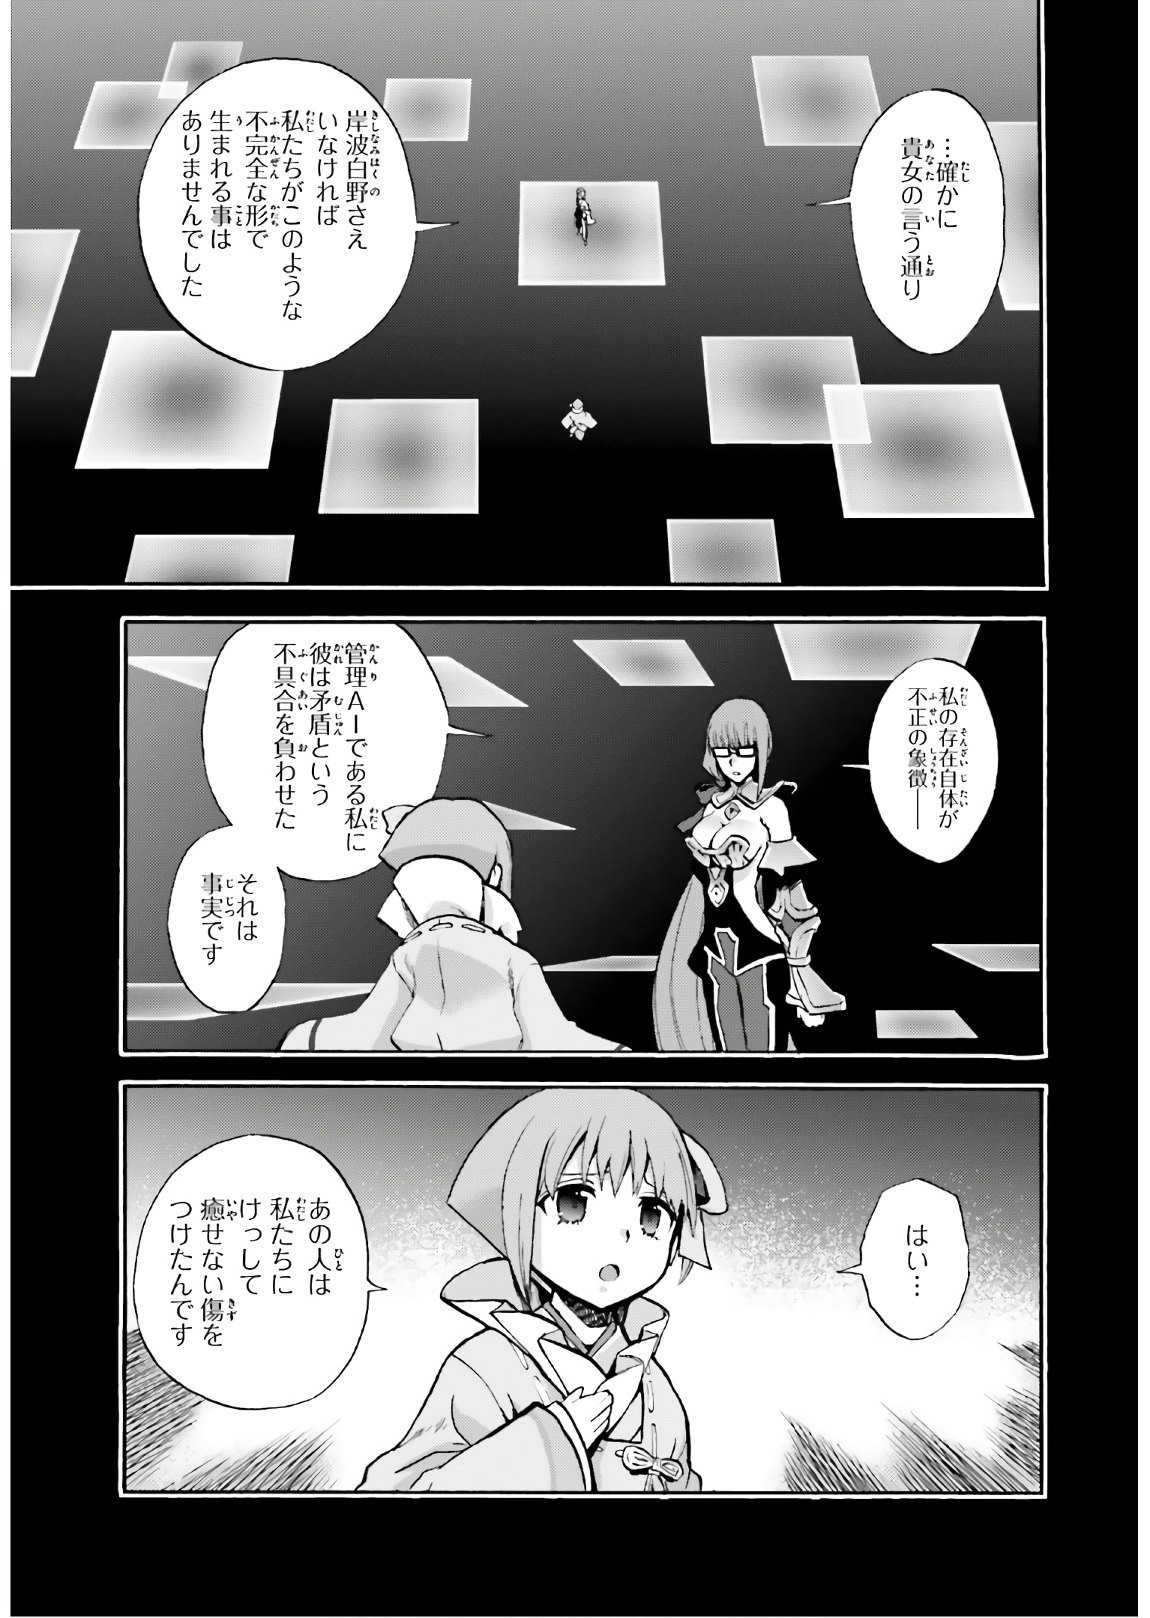 Fate/Extra CCC Fox Tail - Chapter 61 - Page 3